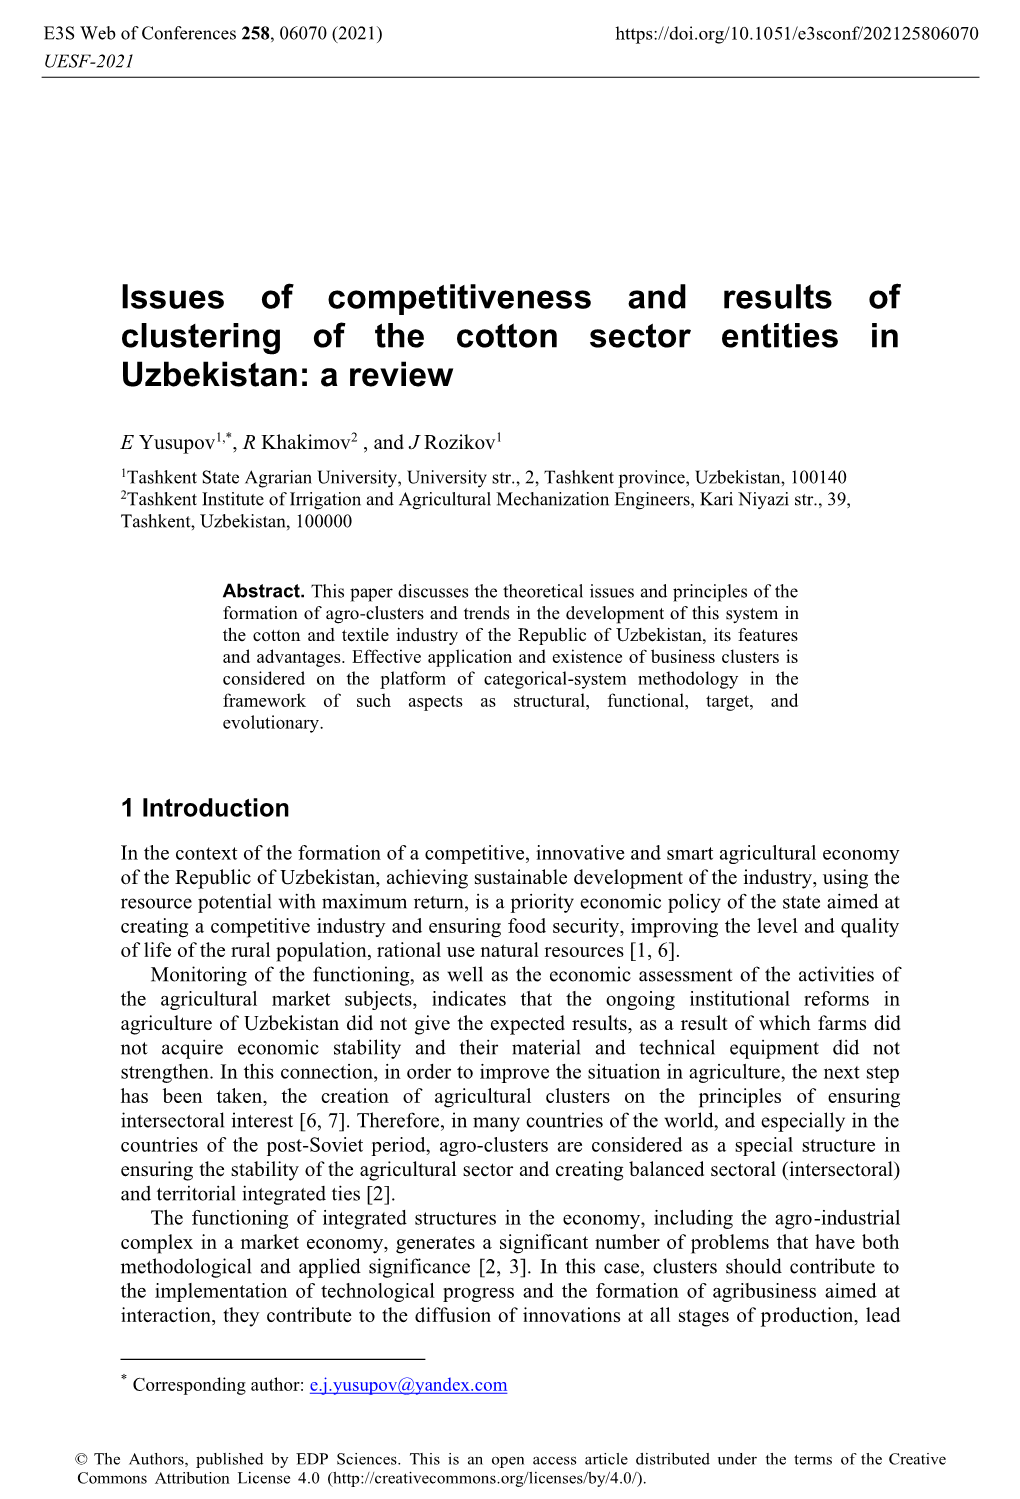 Issues of Competitiveness and Results of Clustering of the Cotton Sector Entities in Uzbekistan: a Review